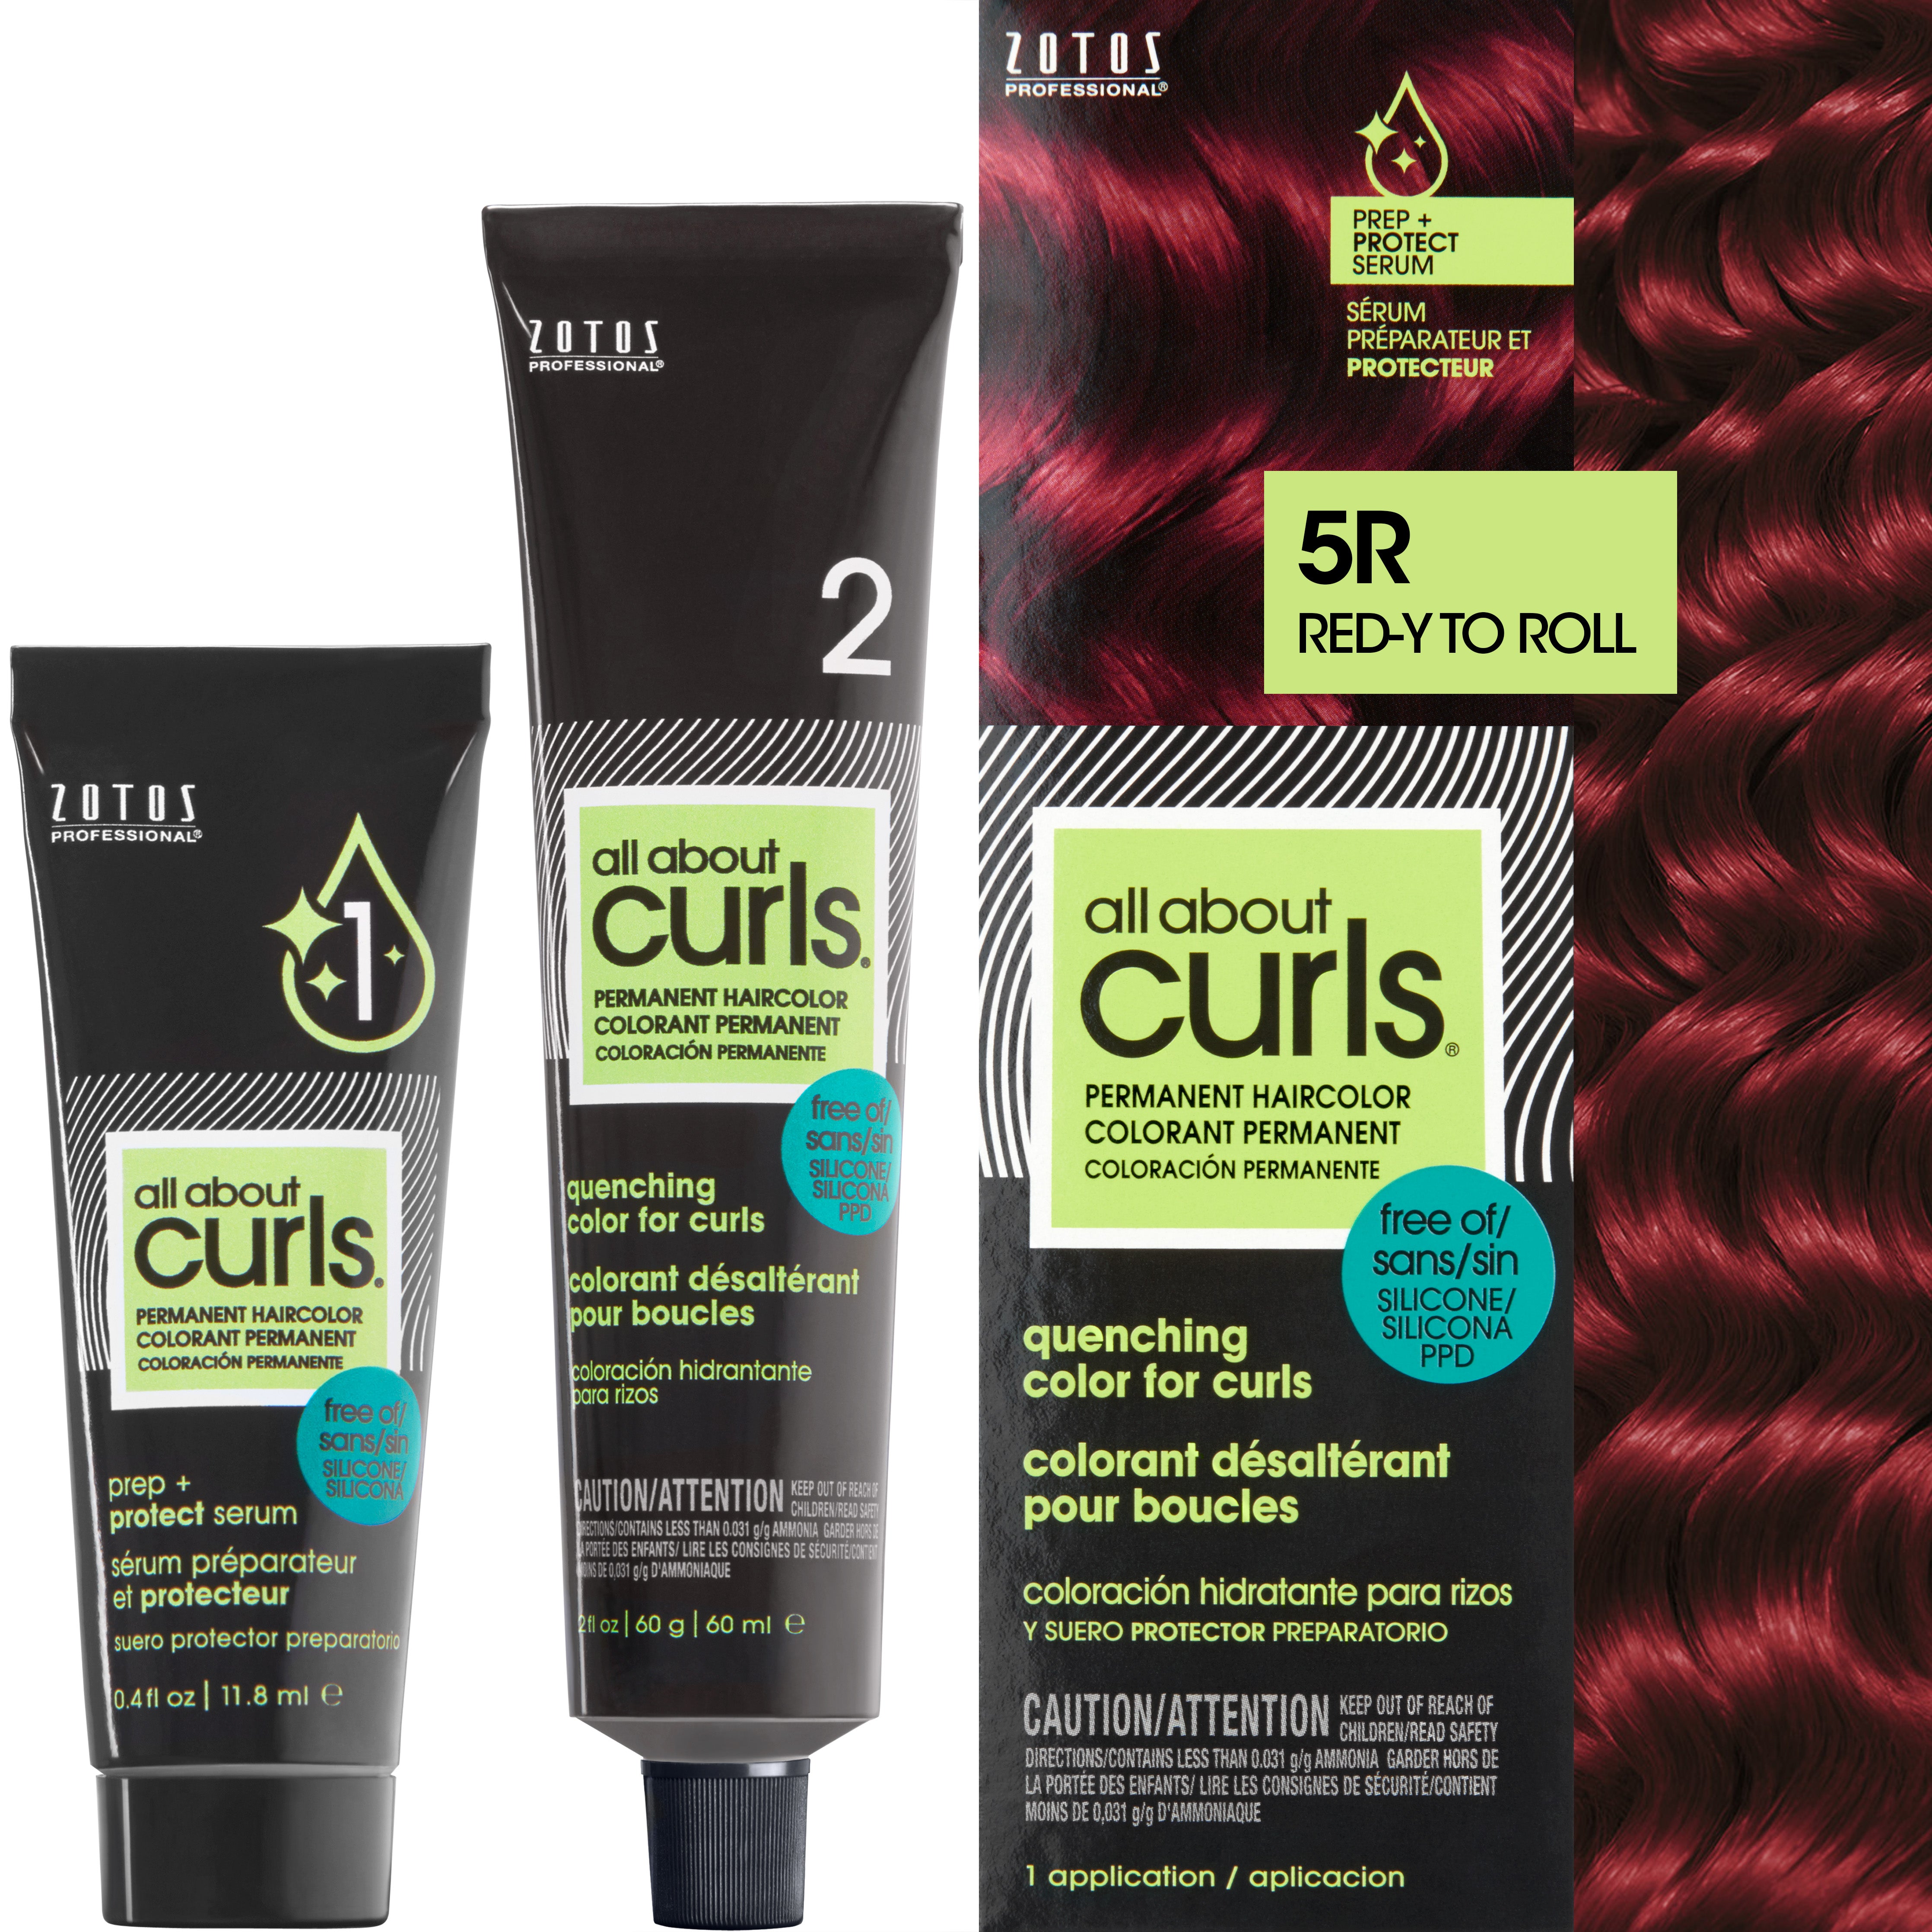 Two bottles and packaging for All About Curls Permanent Color in shade 5R Red-y To Roll.